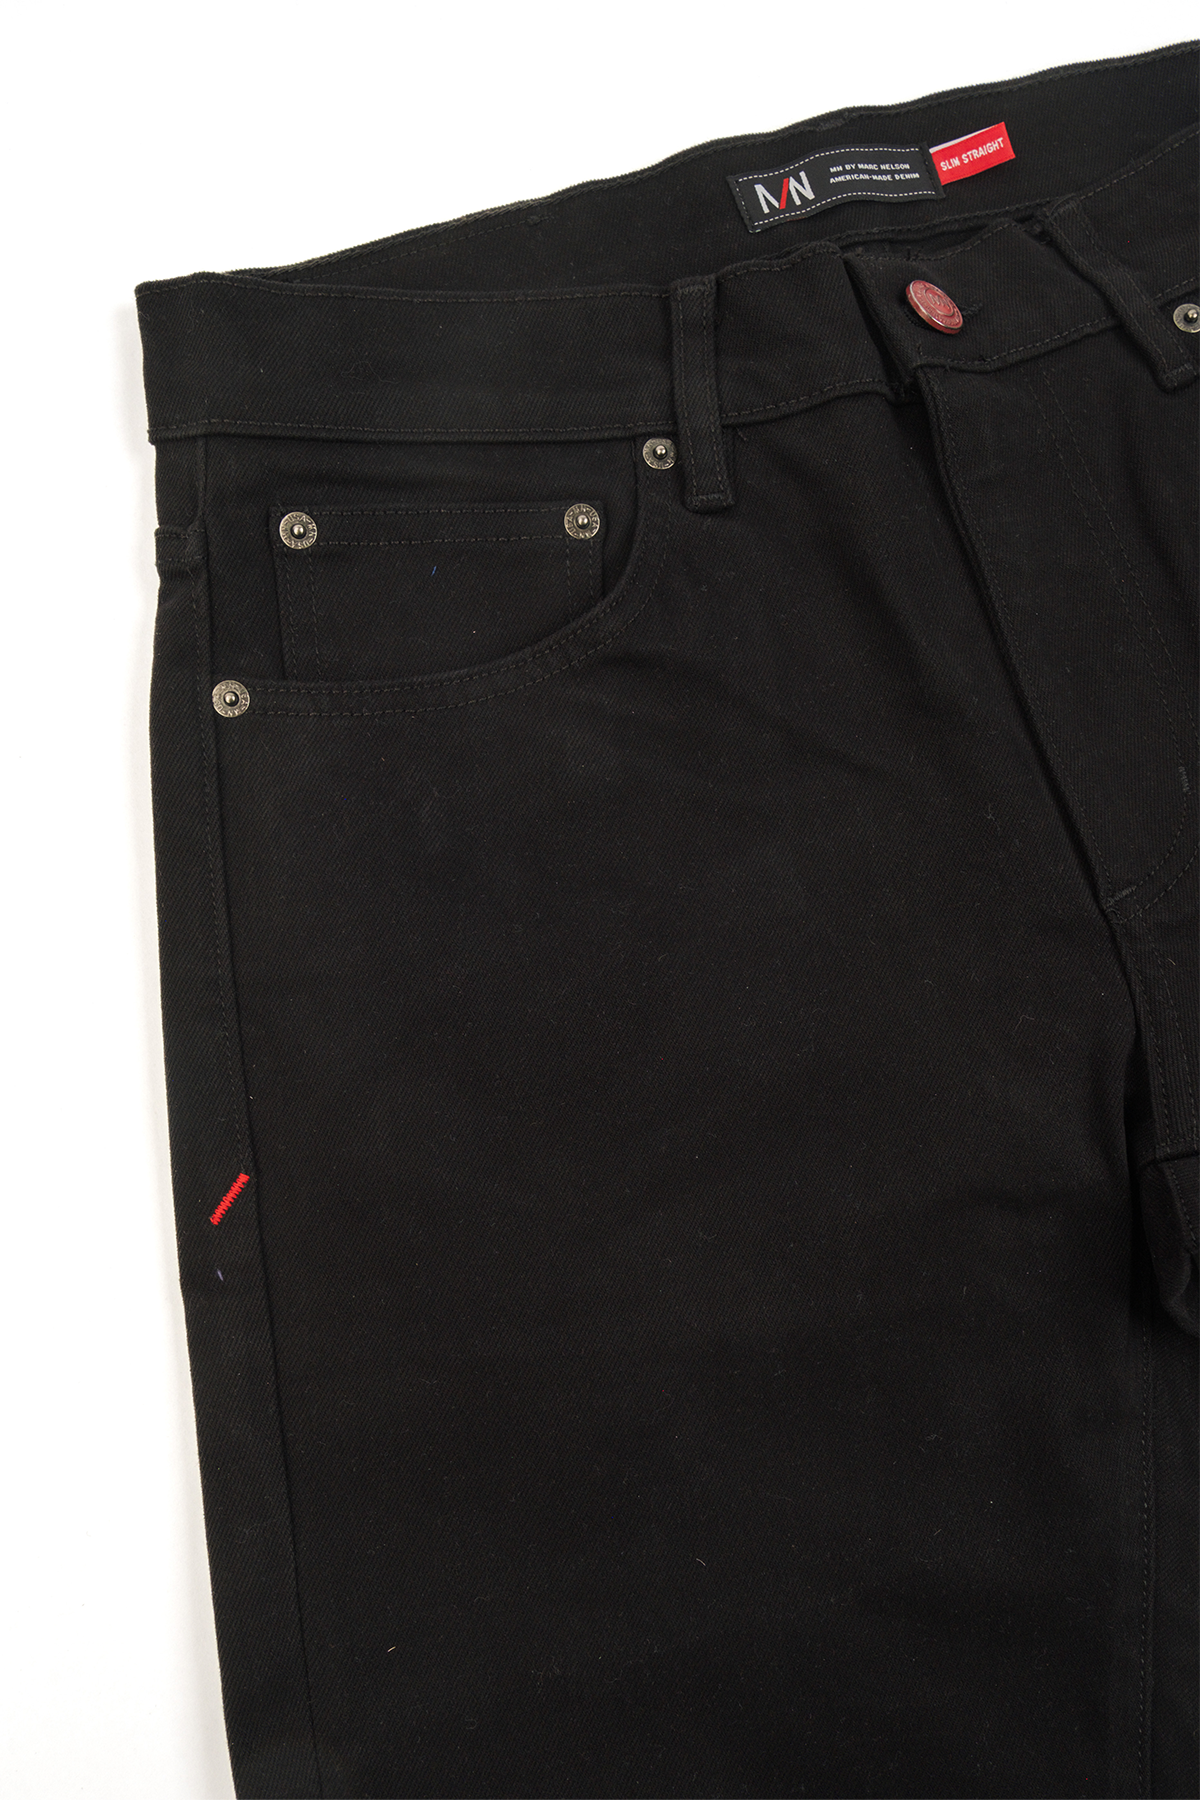 Close up photo of the frontside of black denim displaying the button and pockets.